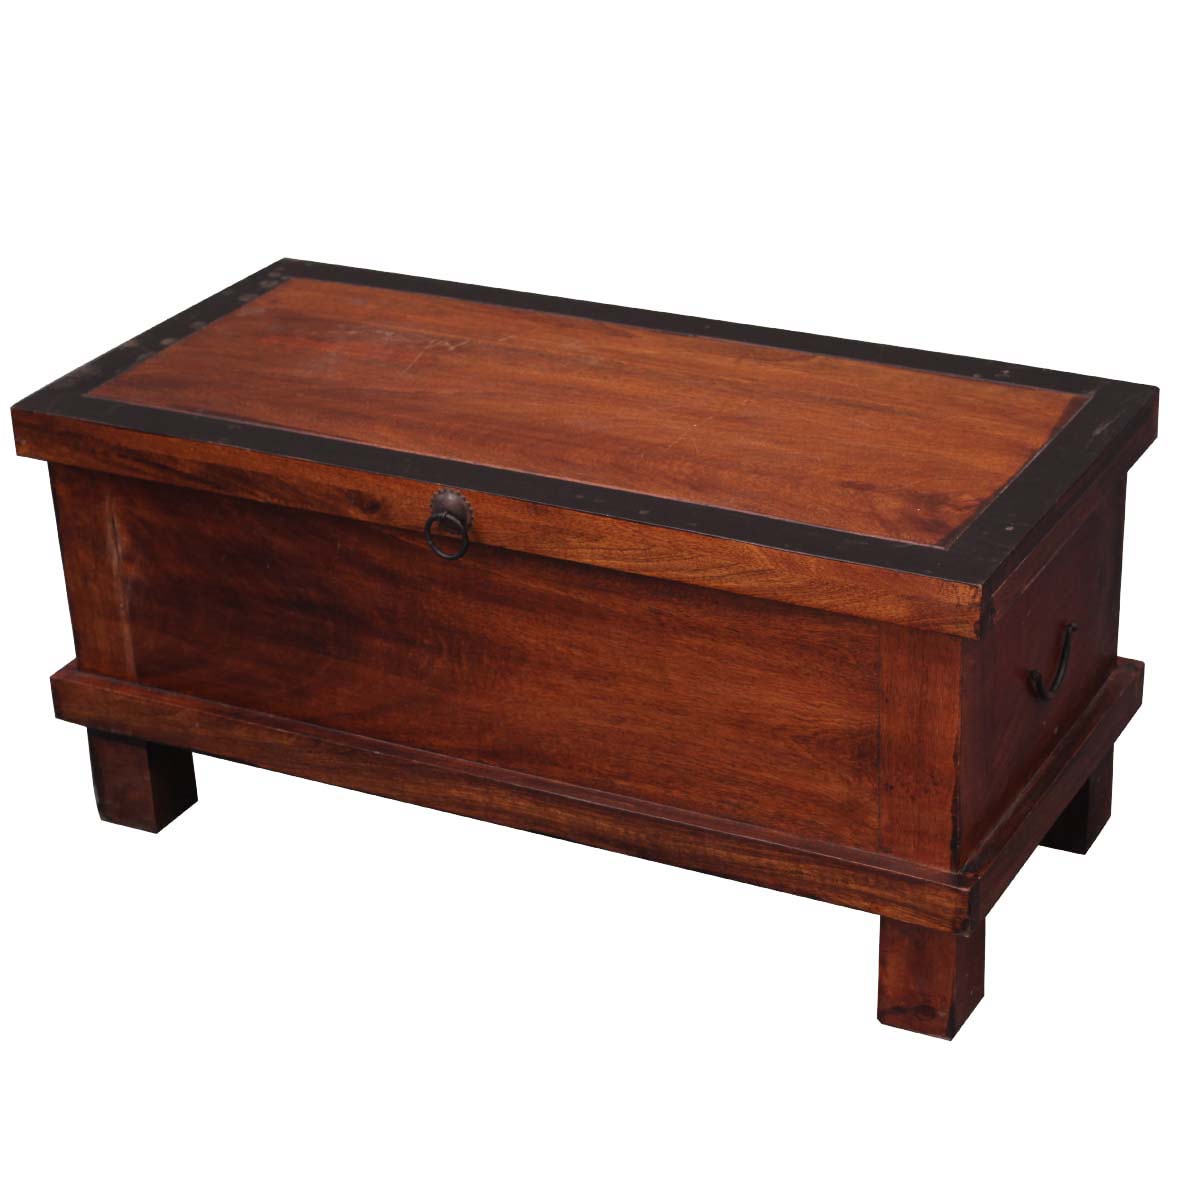 target gold accent table the fantastic best solid hardwood end wood deuce coffee storage trunk chest tables antique wooden mid century modern desk black glass living room cat box